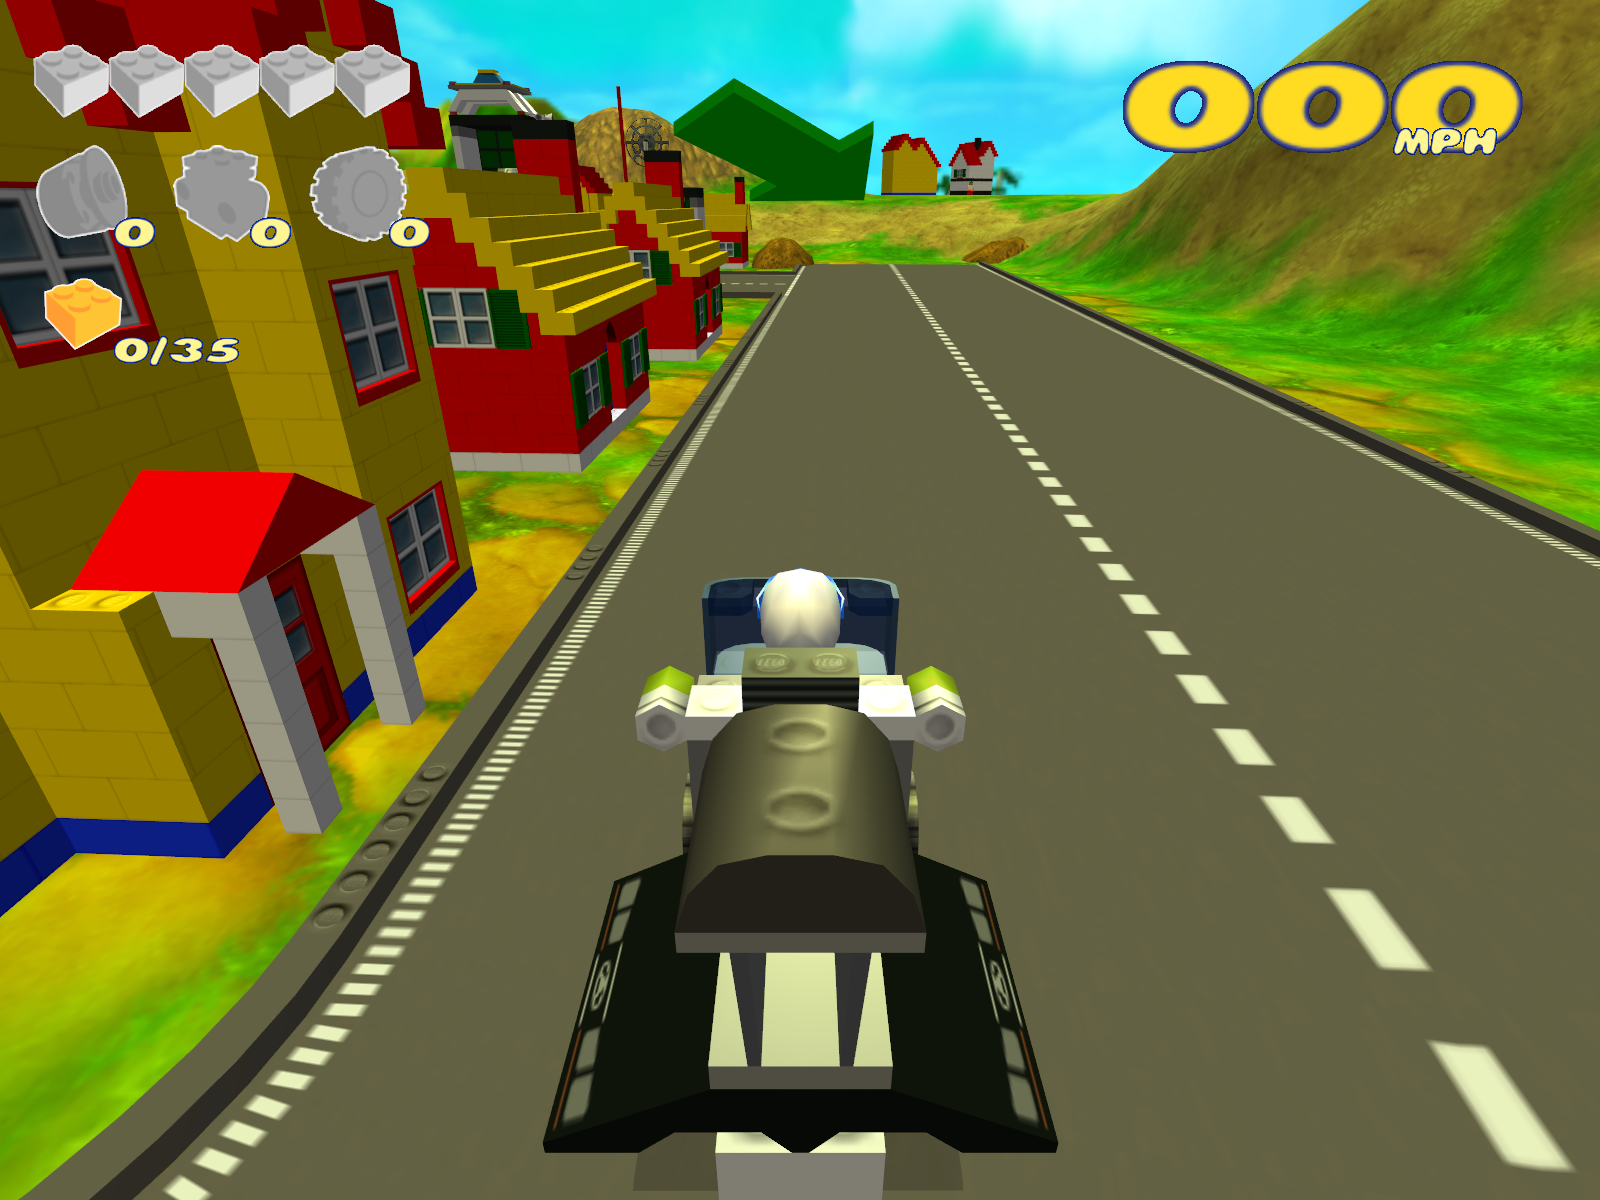 Lego Racers 2 PC Version Full Game Free Download